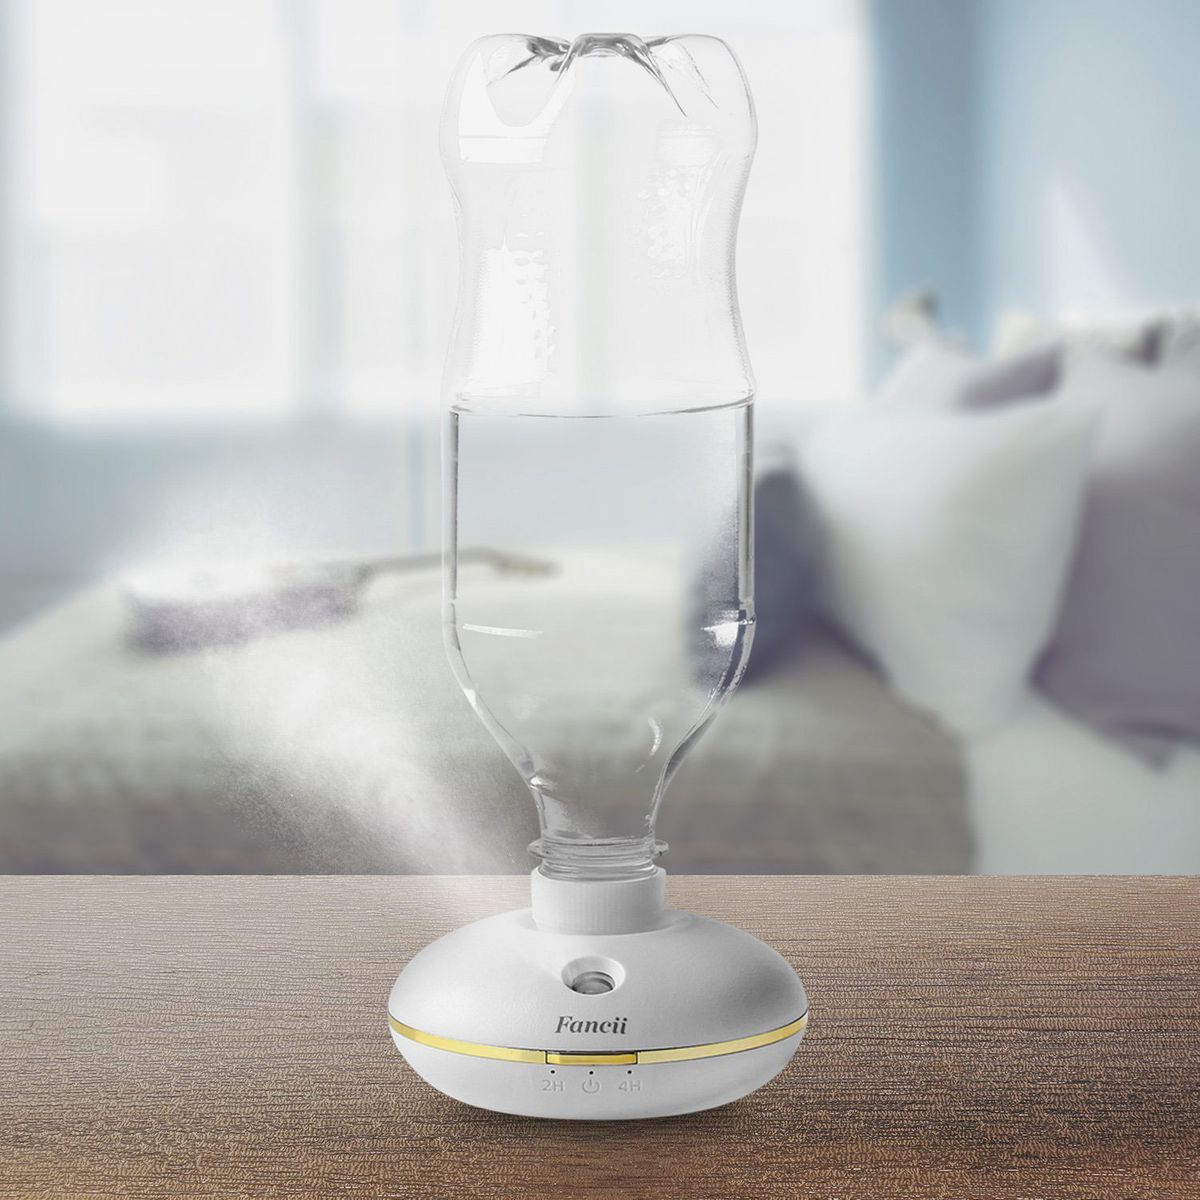 USB Personal Humidifier Perfect for use in The Office Great Cool Mist humidifier for Allergies and Sinus Relief. Home Hotel or car Take it on The go Ostad Portable Humidifier for Travel 